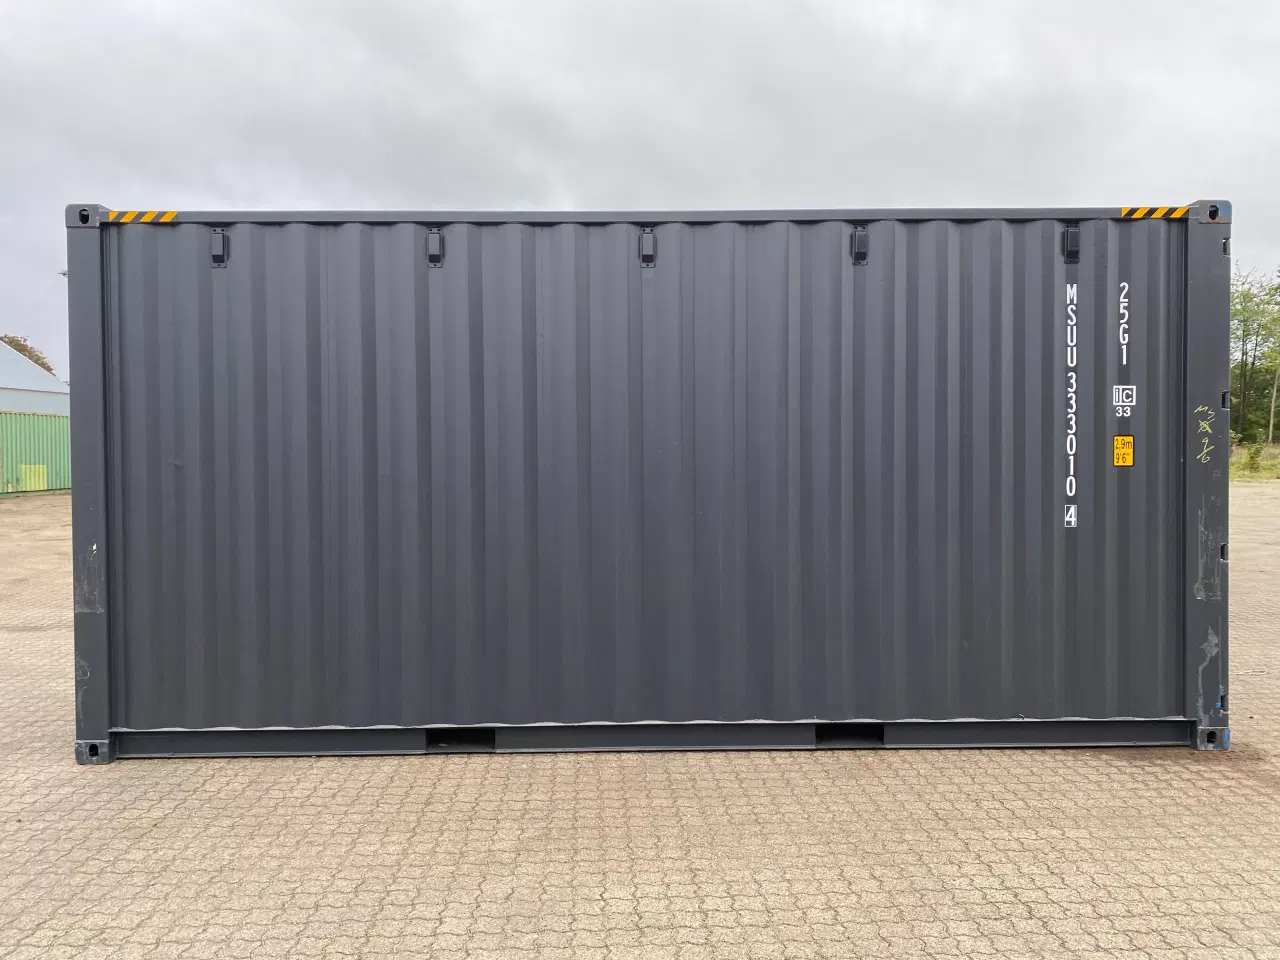 Billede 5 - 20 fods NY - High Cube Container ( extra høj )